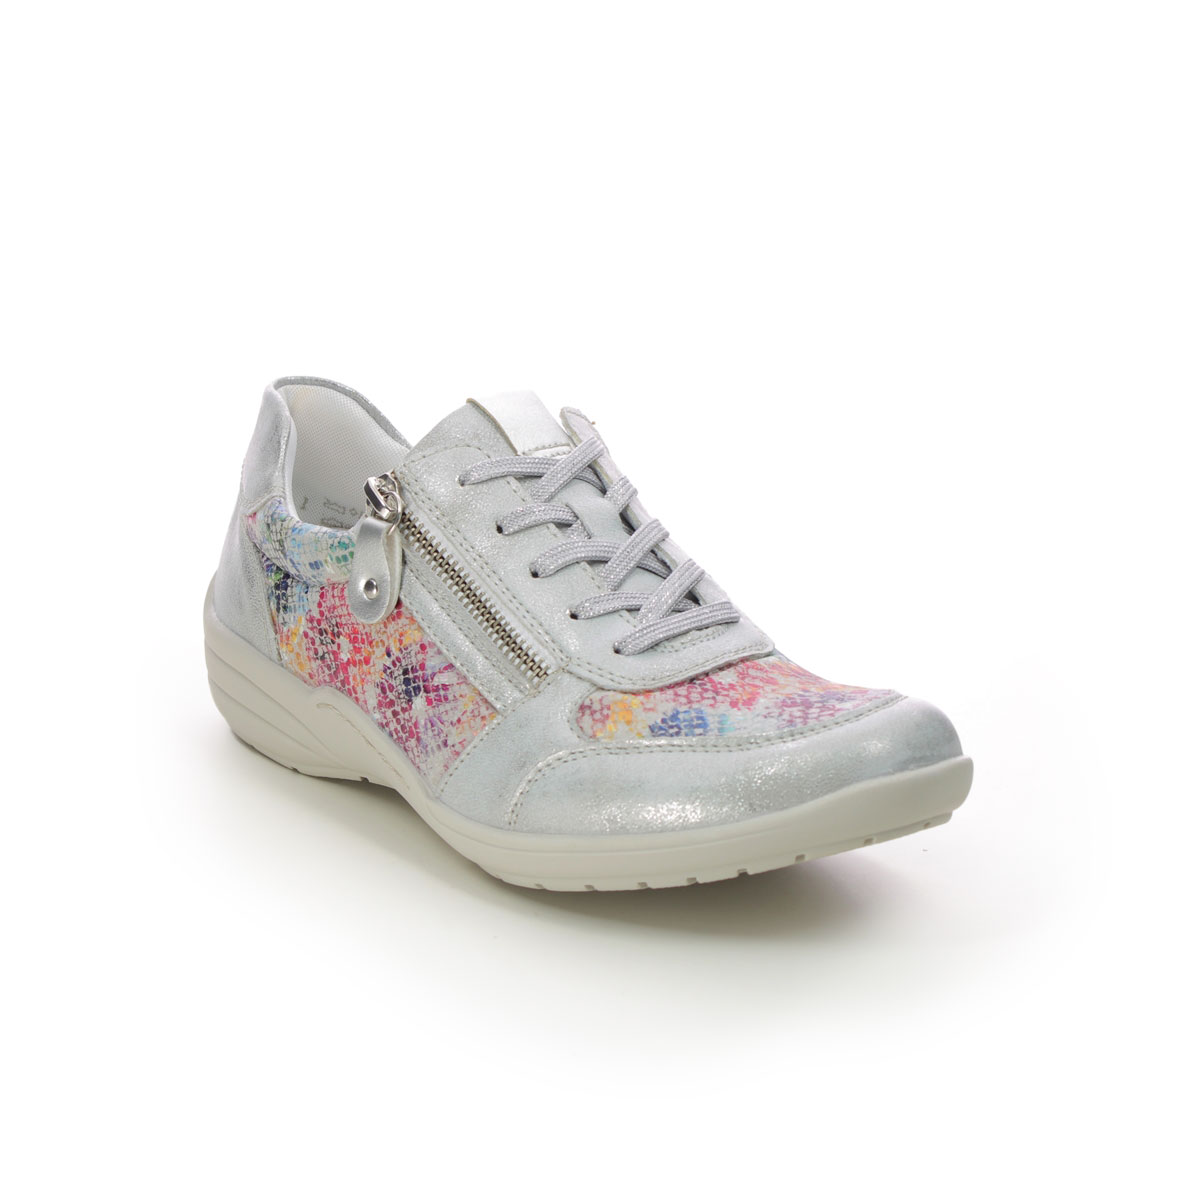 Remonte Bertazip Silver Floral Womens Lacing Shoes R7637-40 In Size 40 In Plain Silver Floral